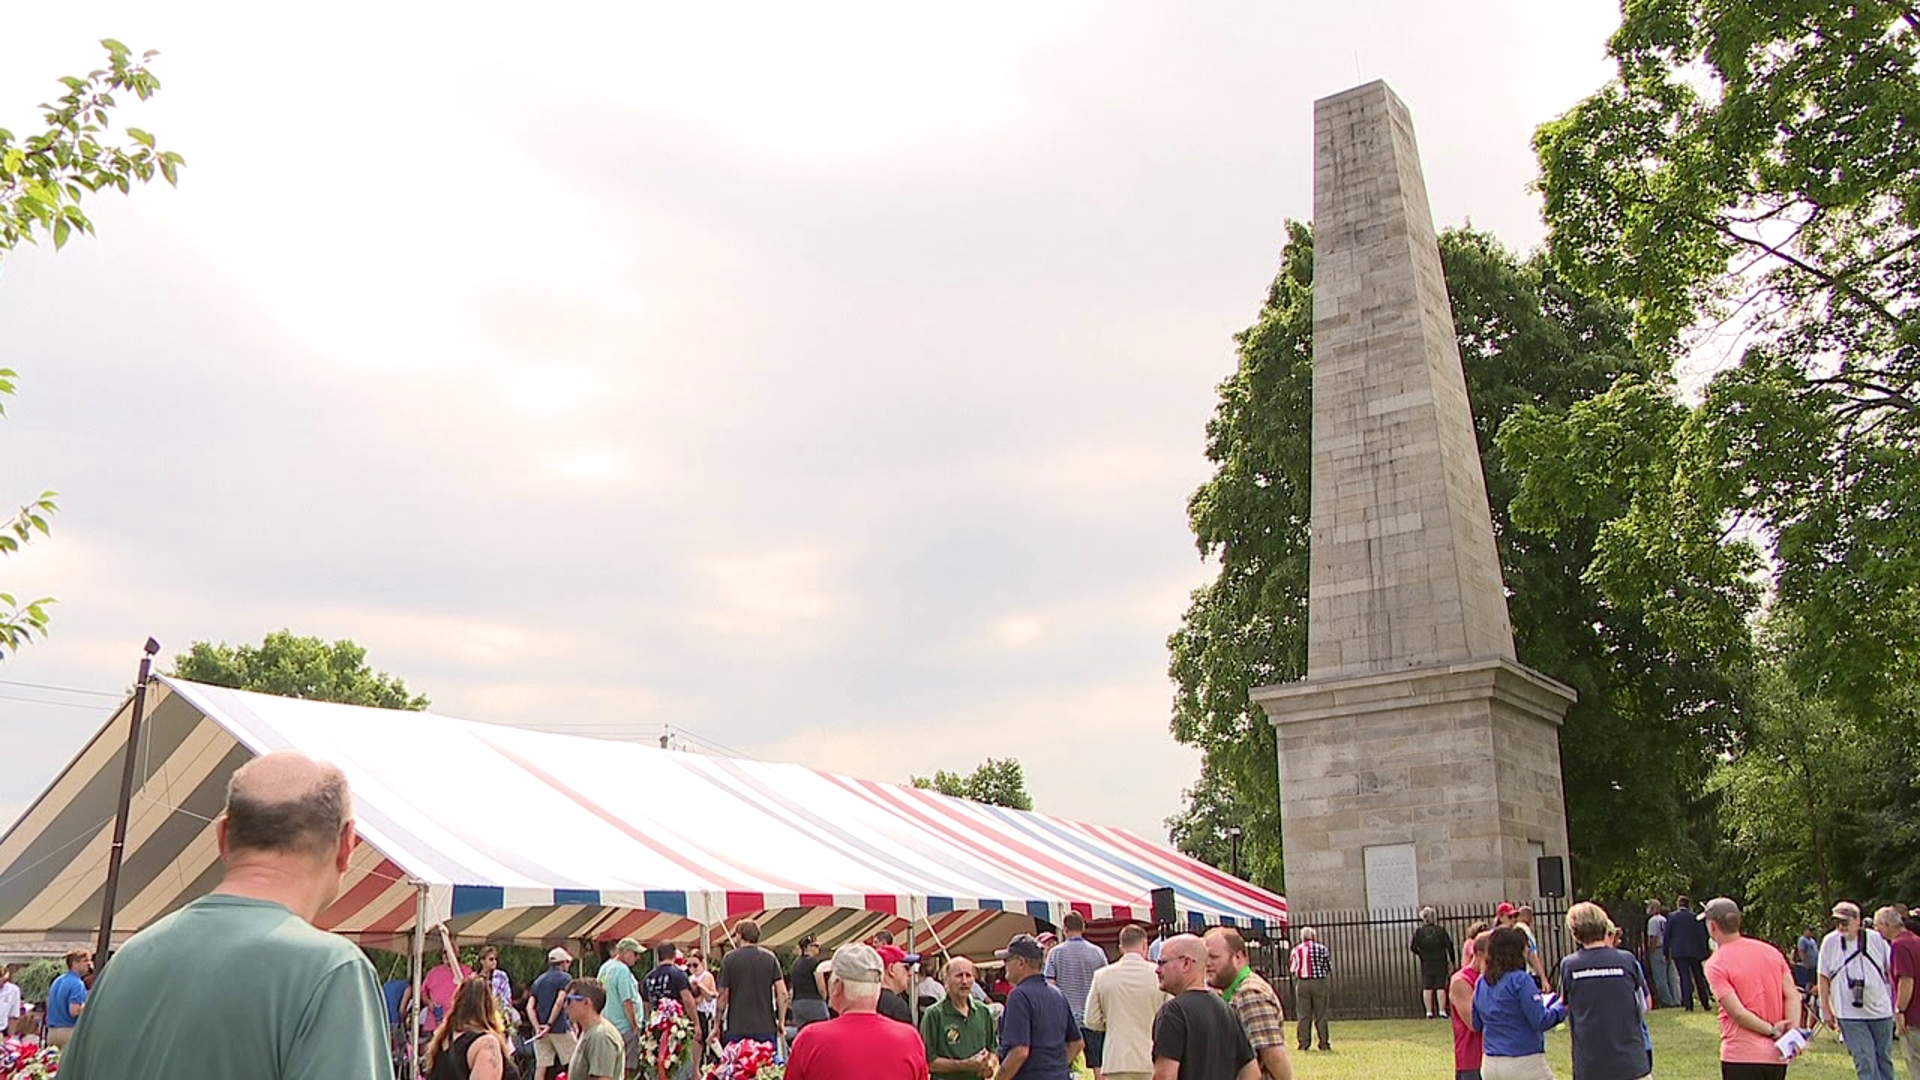 People joined together on July 4th to commemorate the lives of those lost in the battle on July 3rd, 1778.